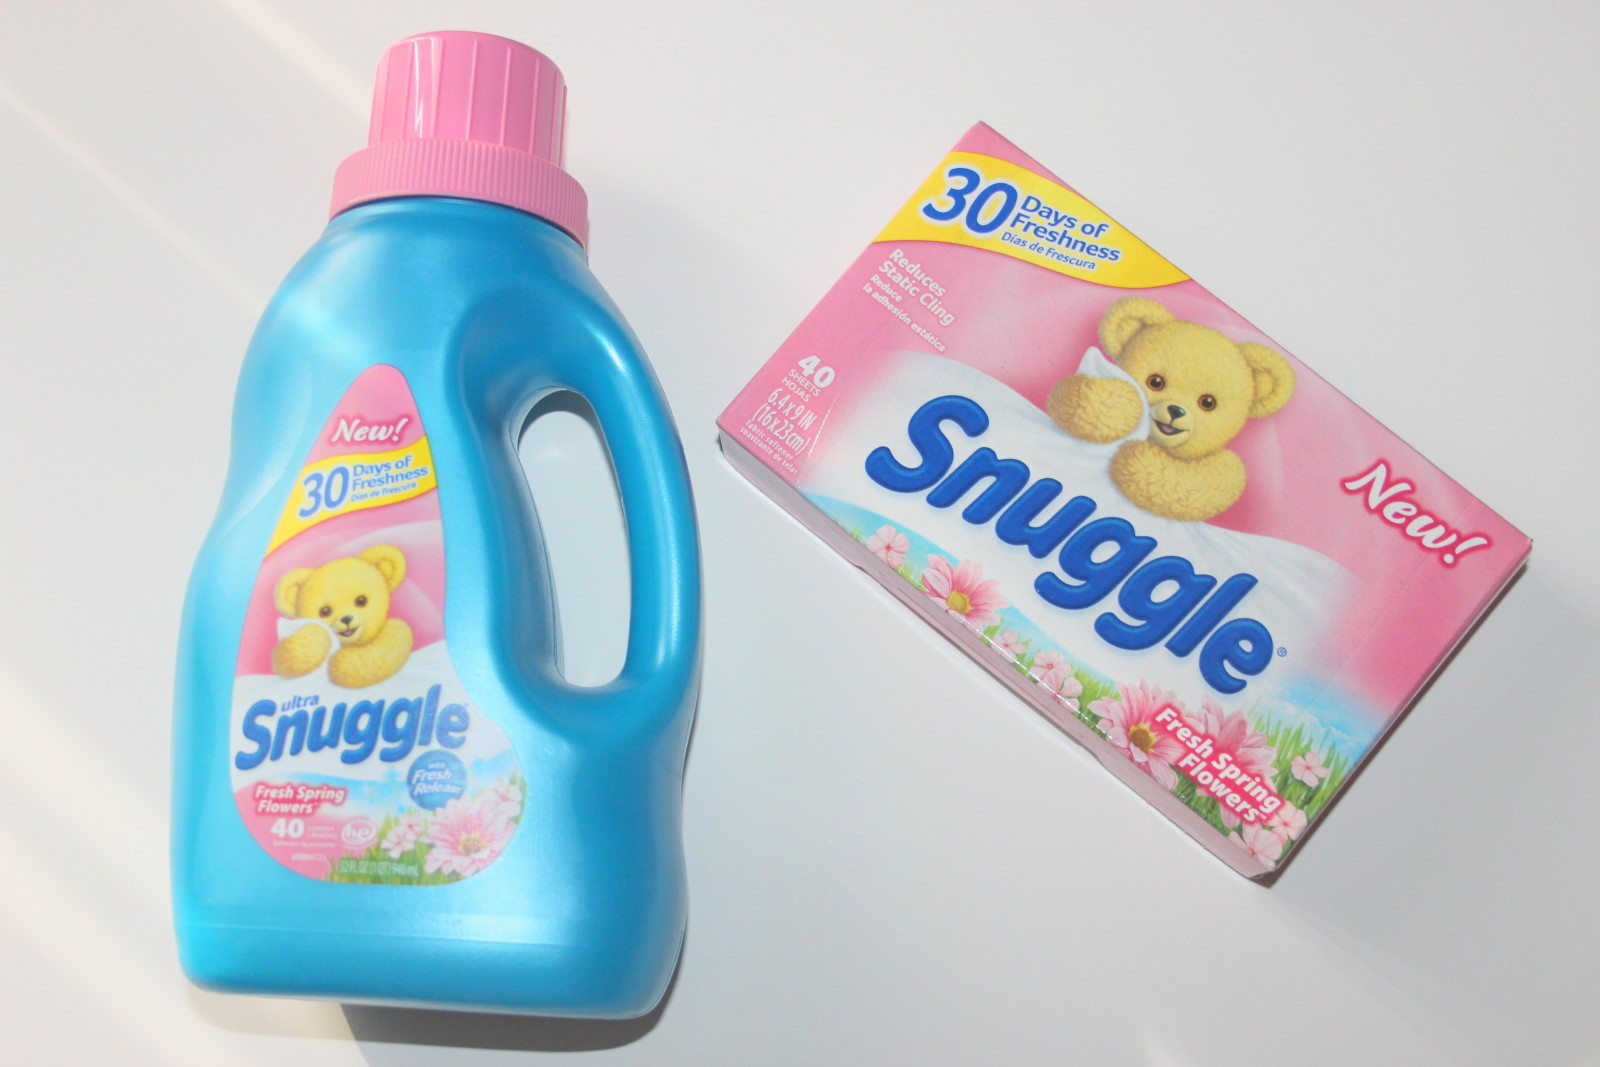 Review of Snuggle Fresh Spring Flowers